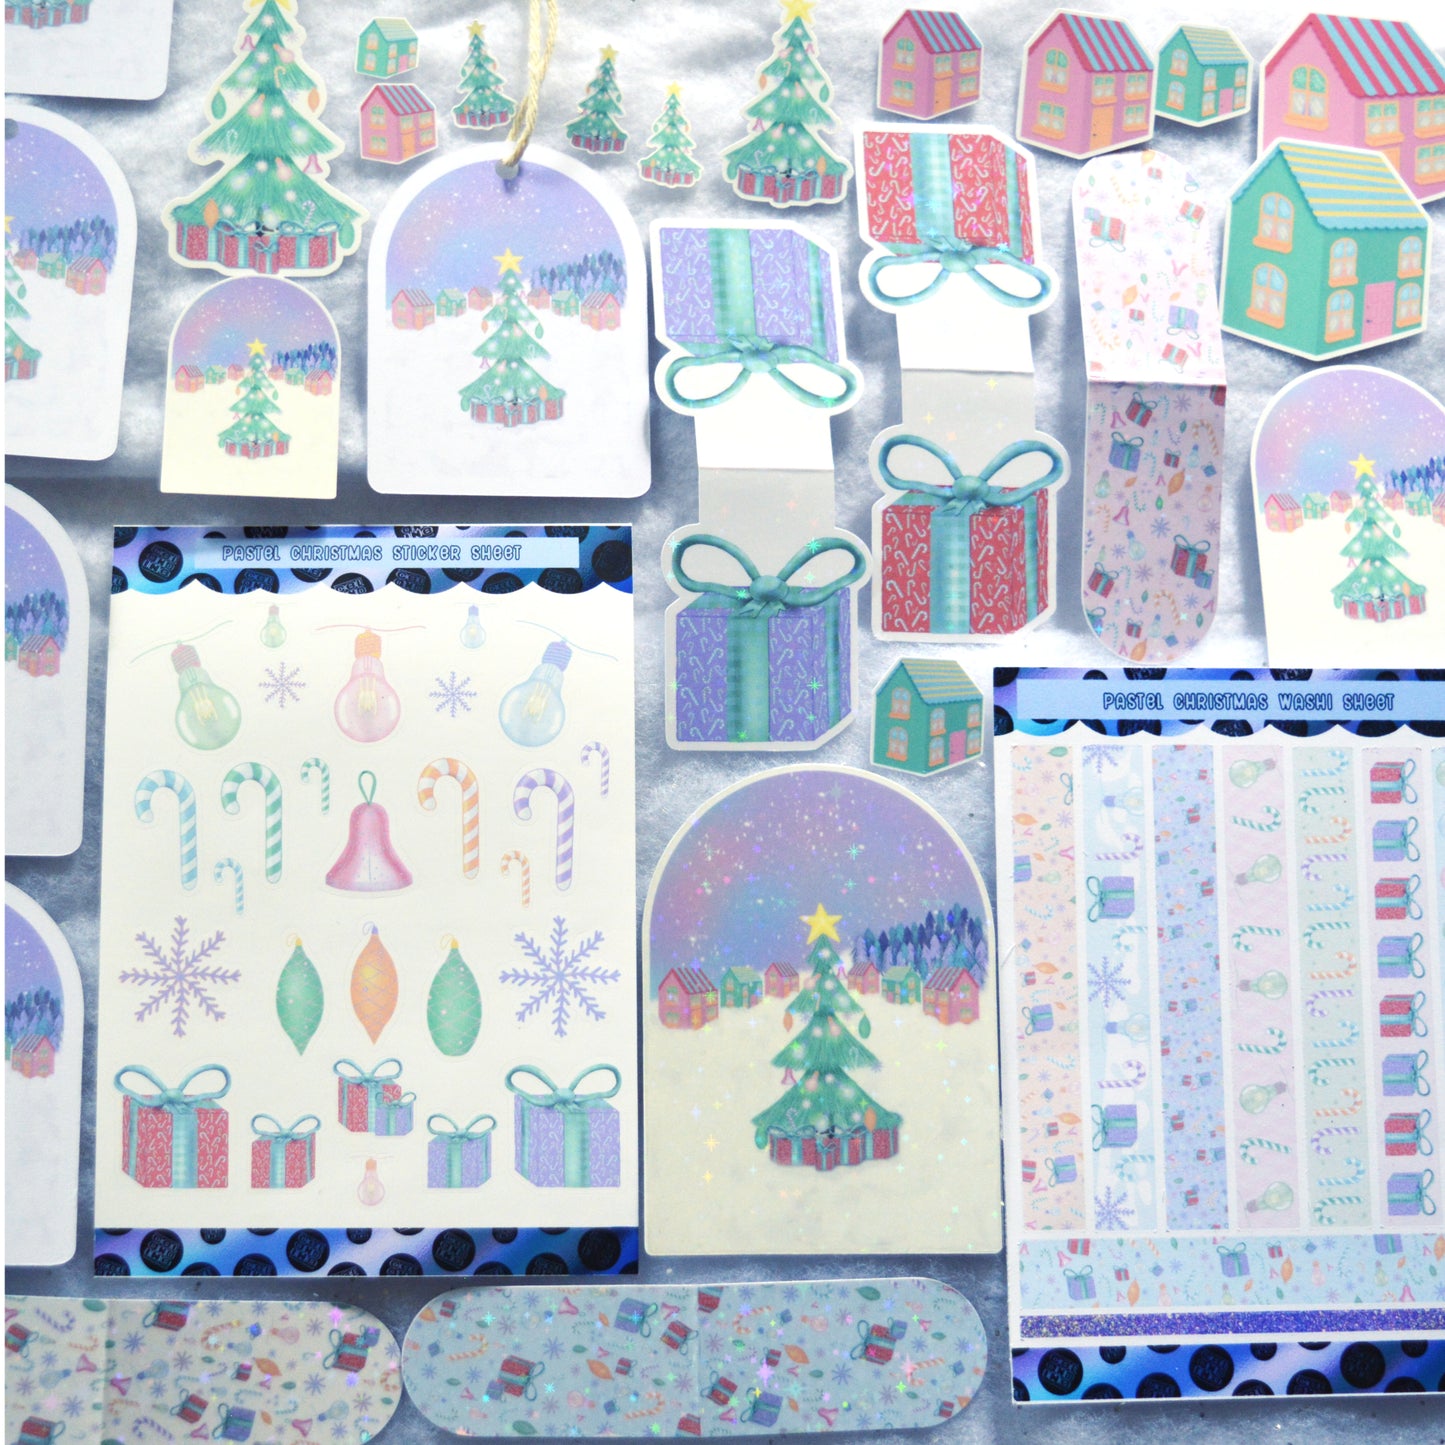 Christmas Collection - Winter Wonderland Holographic Vinyl Sticker - Large, Water-Resistant, Great for cups, mugs and water bottles